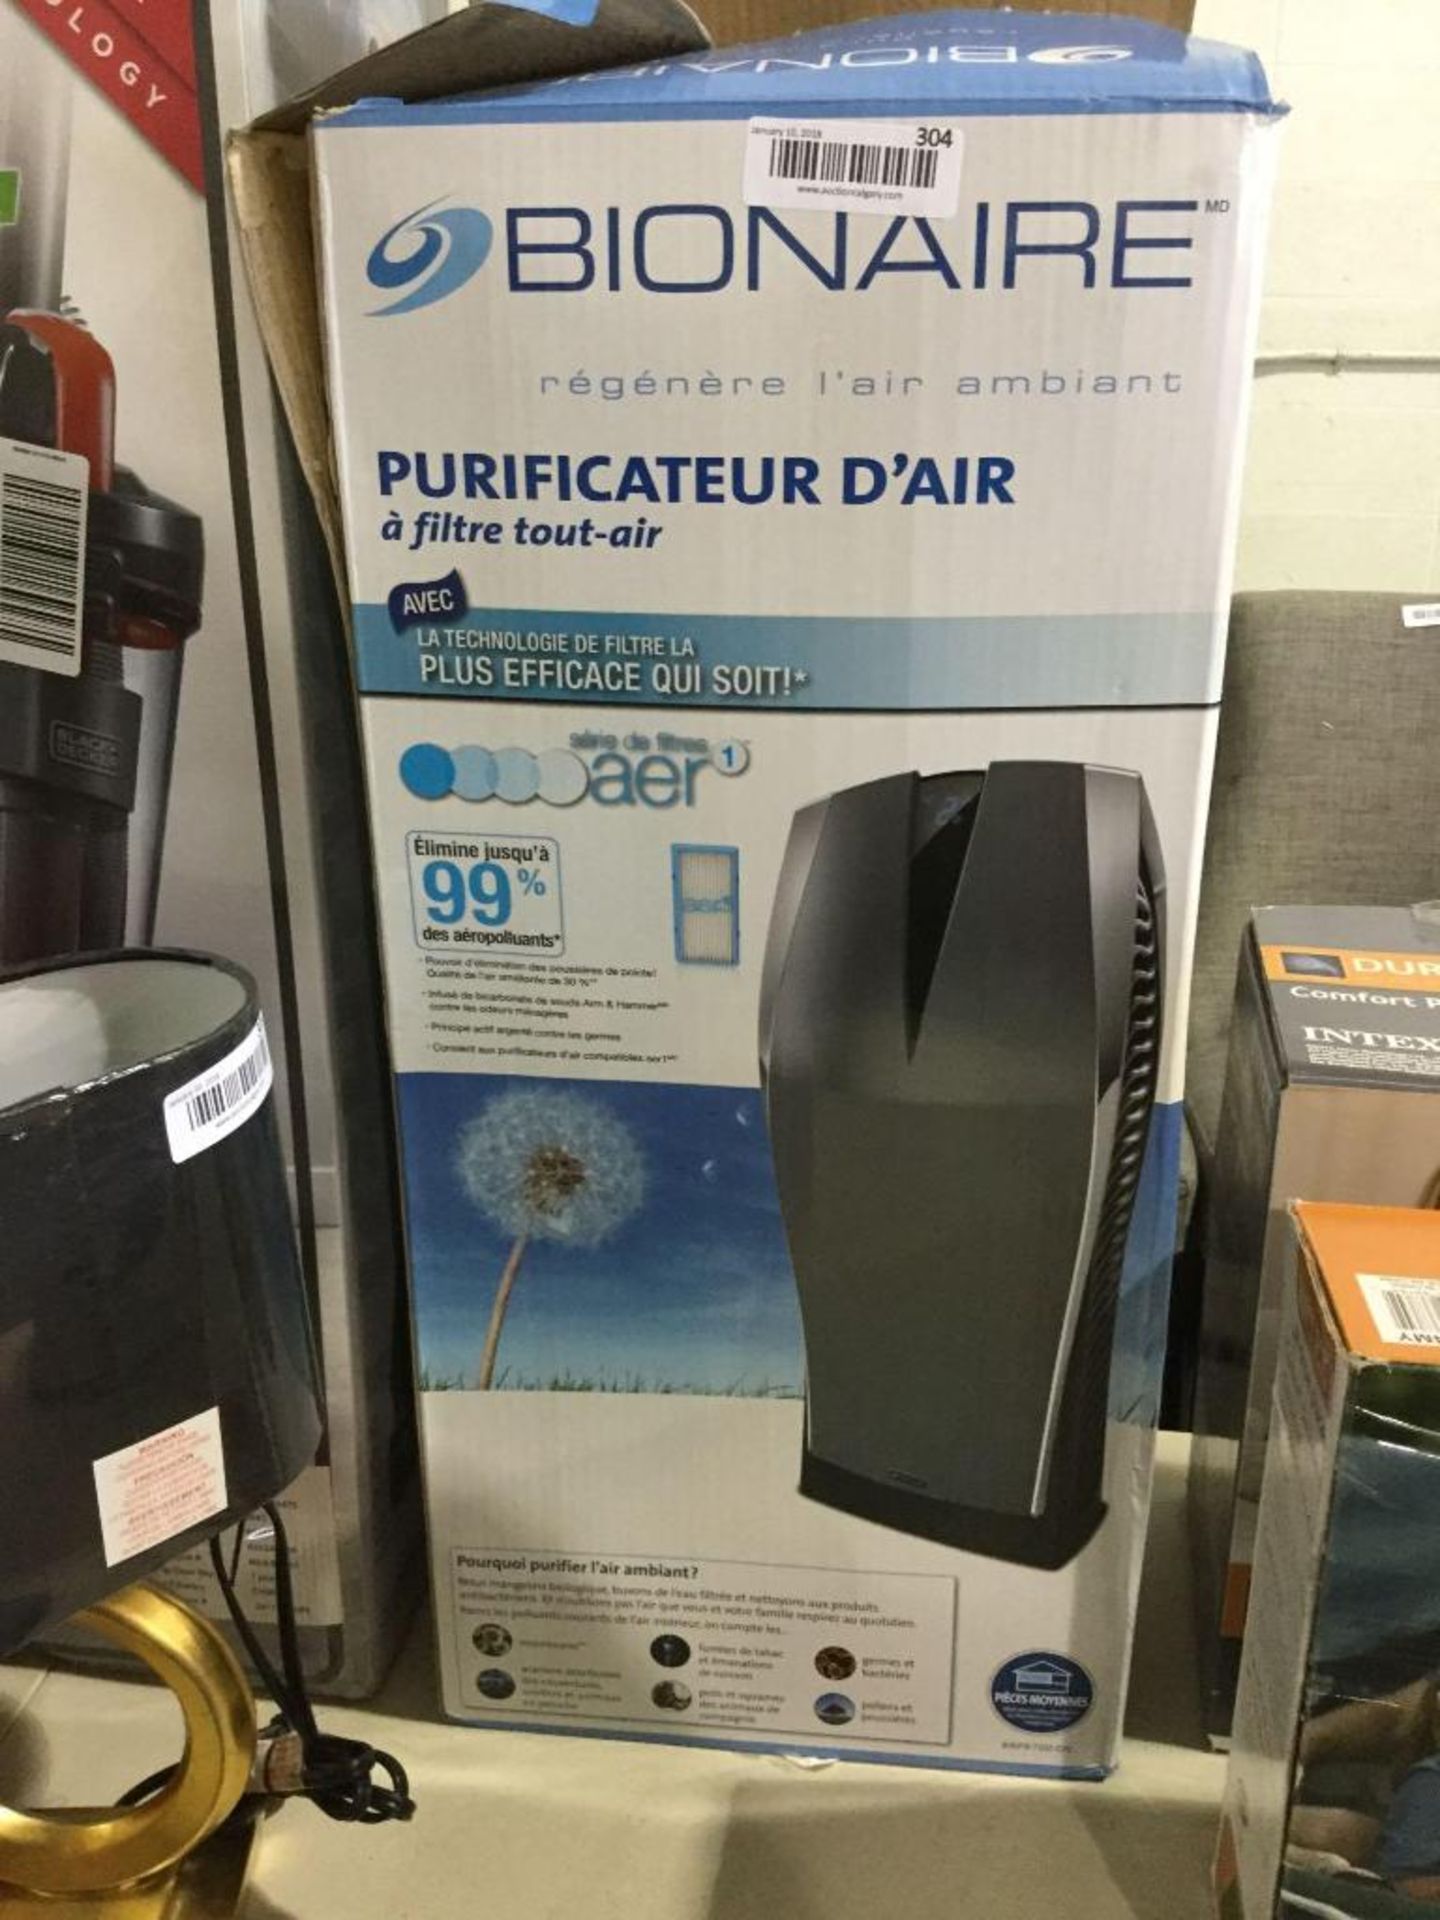 Bionaire Air purification system